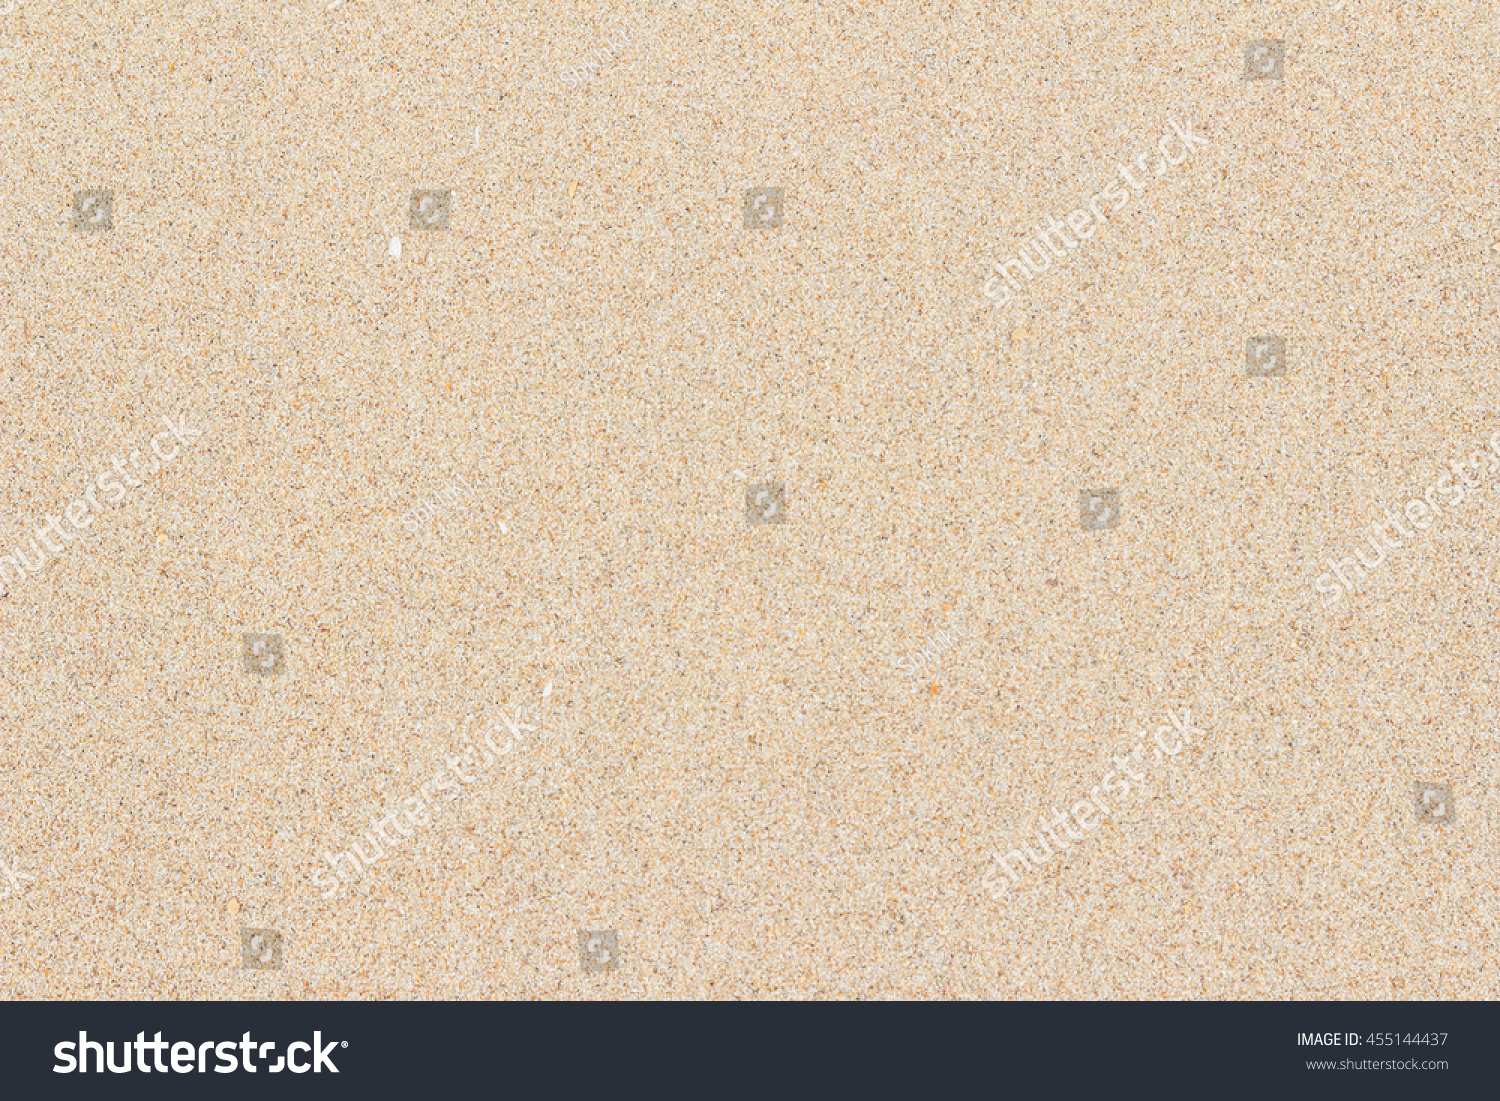 Sand On Beach Can Be Used Stock Photo 455144437 | Shutterstock